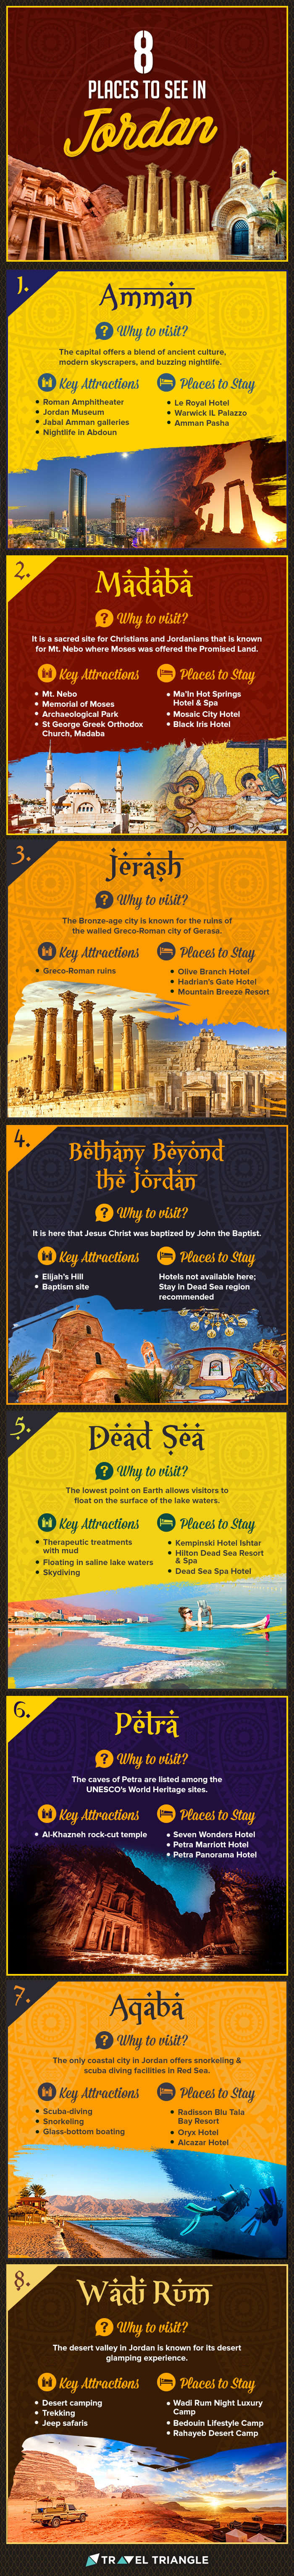 An infographic of the best places to see in Jordan